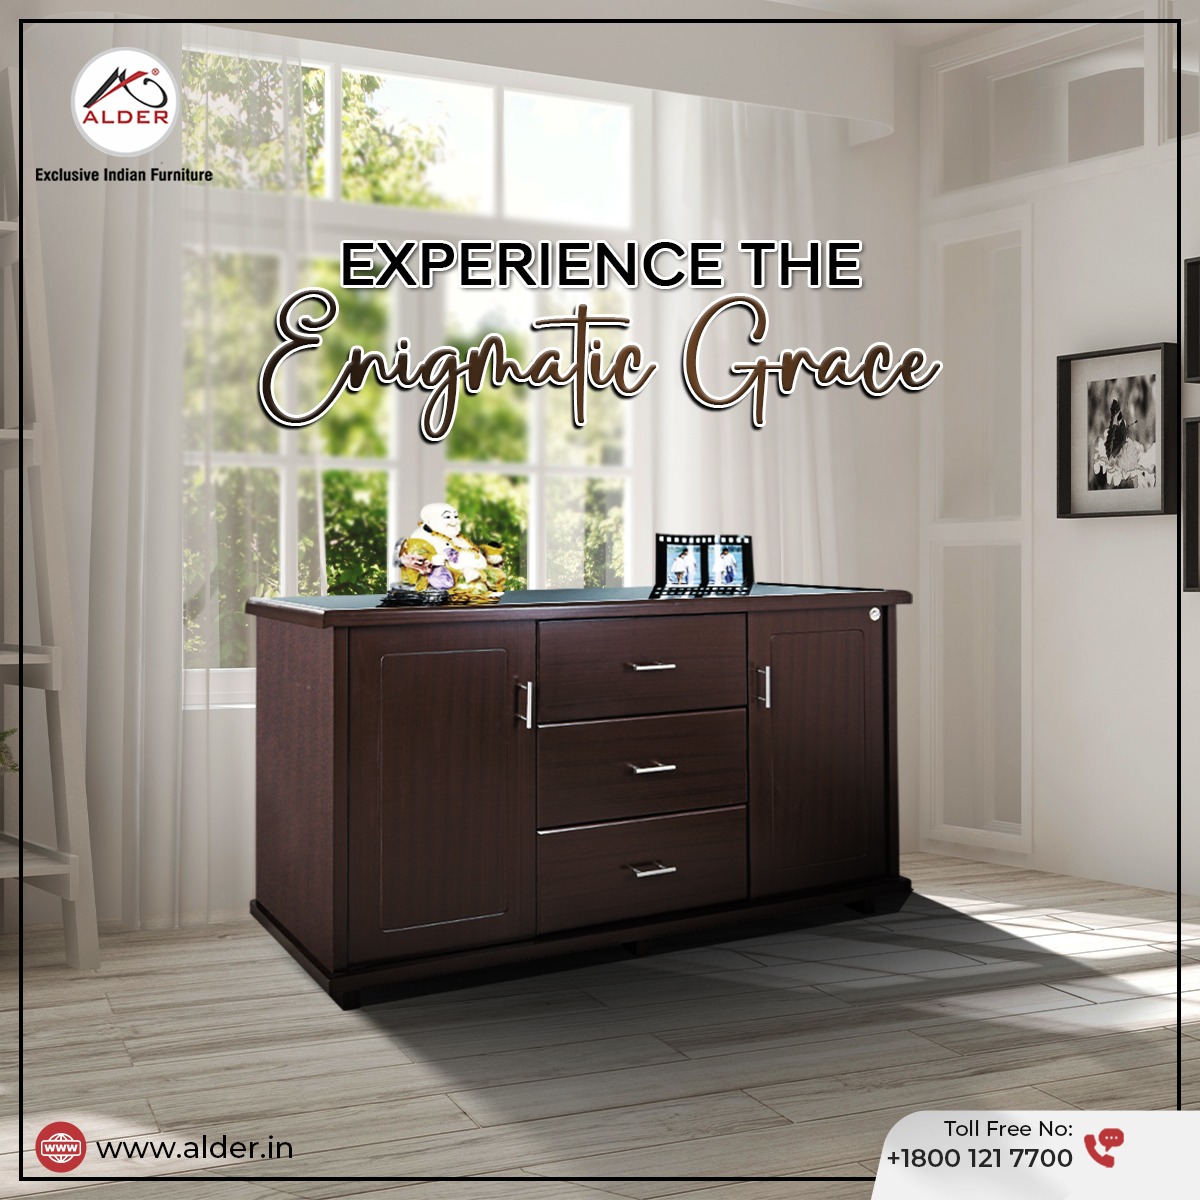 Beautify Your home with Alder Furniture's multi-utility storage which has an exceptional design for exceptional spaces.
.
.
#alder #alderfurniture #multiutilitystorage #collection #style #luxury #fashionable #storage #decor #elegantdesign #homefurnishing #exceptionaldesign